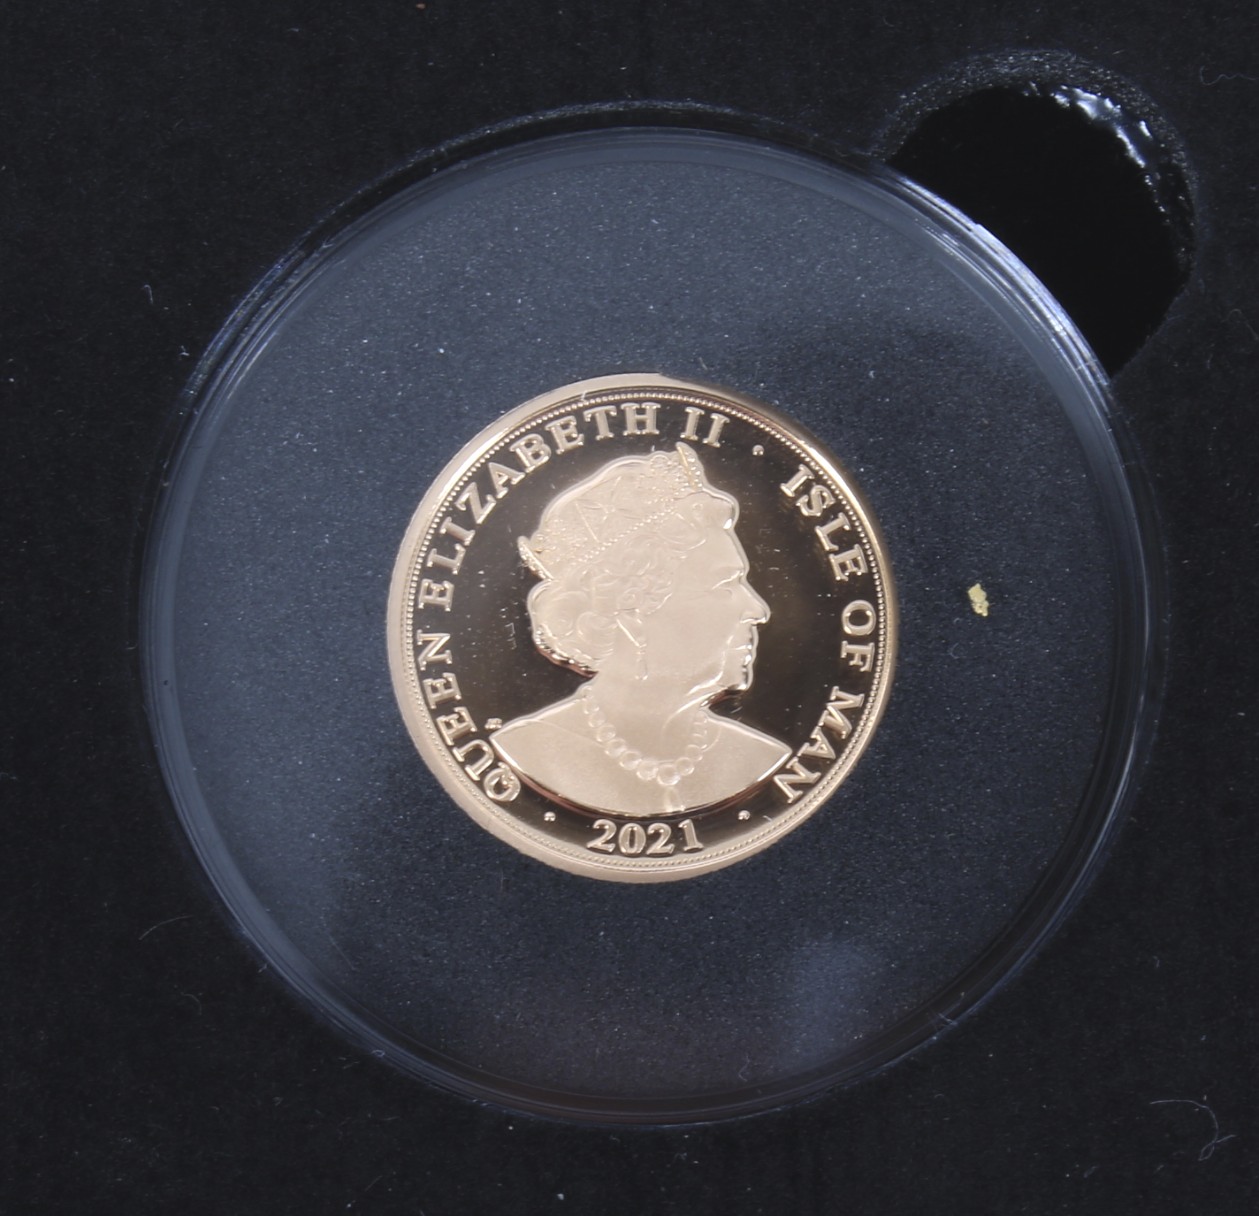 A Limited Edition 2021 sovereign celebrating the 95th birthday of Queen Elizabeth II. No. - Image 2 of 3